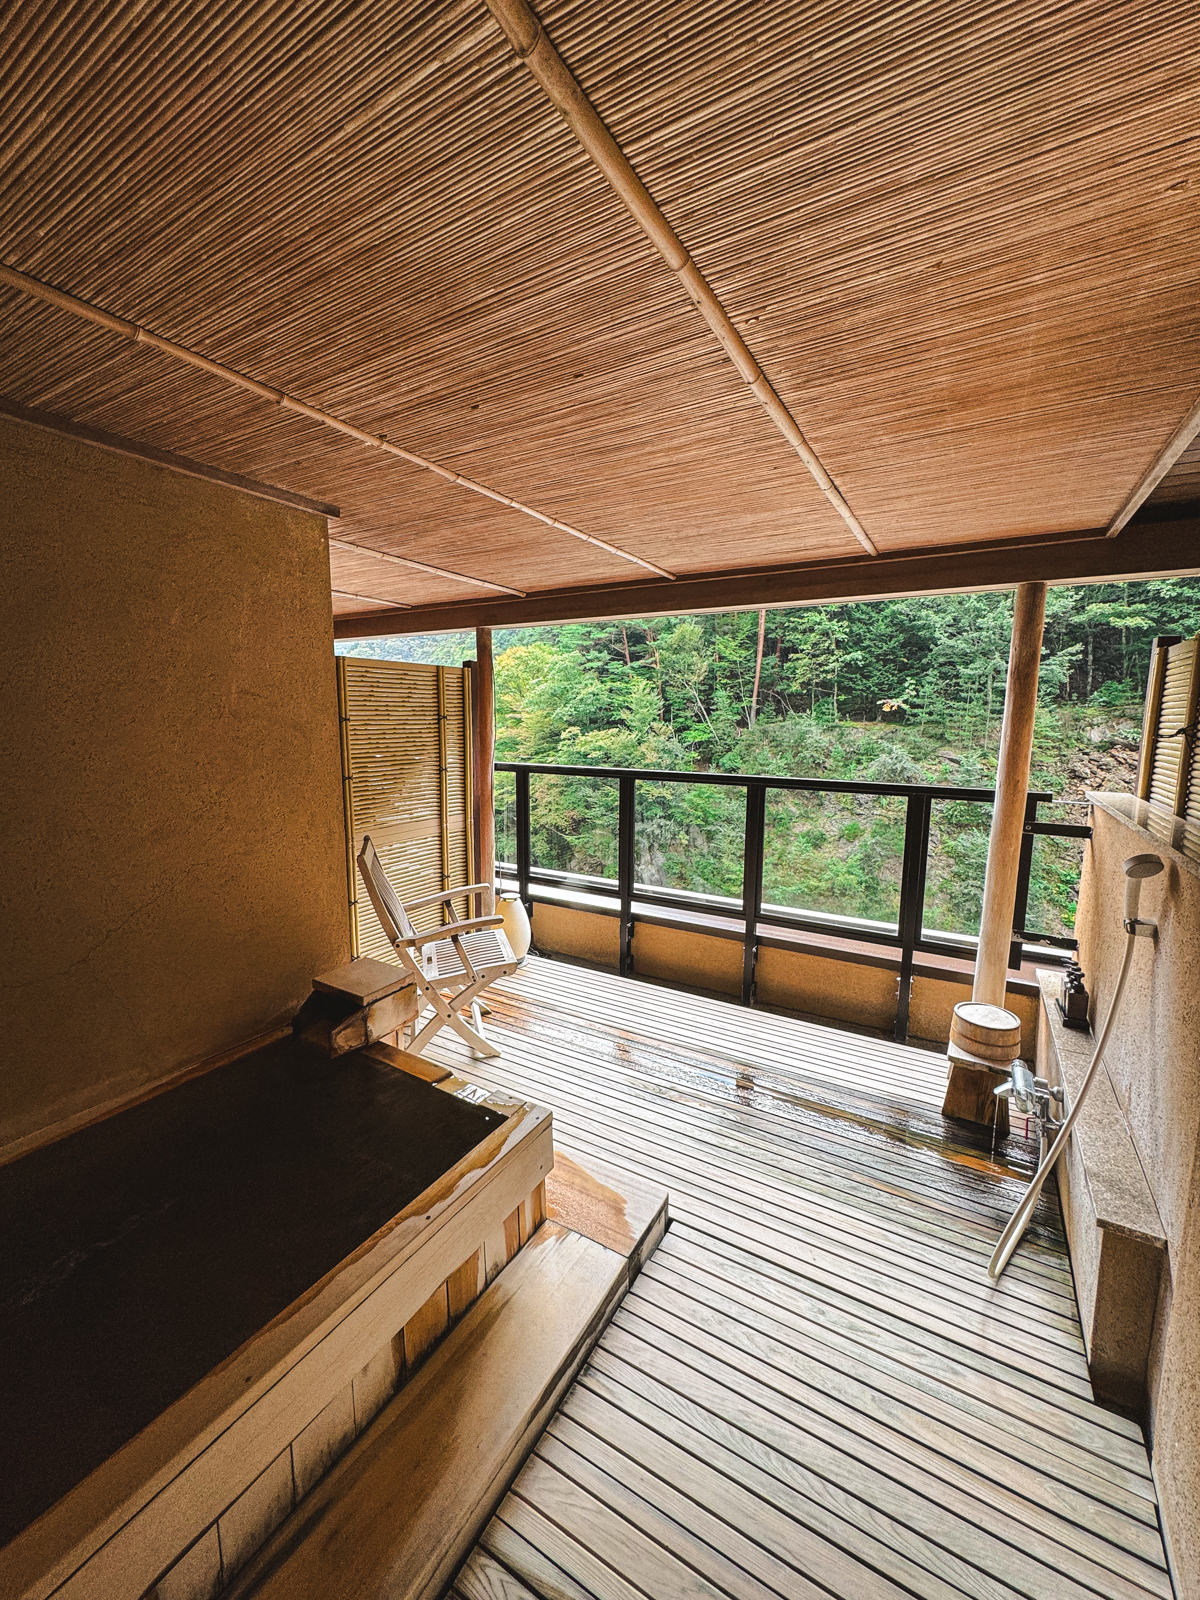 Outdoor onsen surrounded with wooden planks with a forest in background.